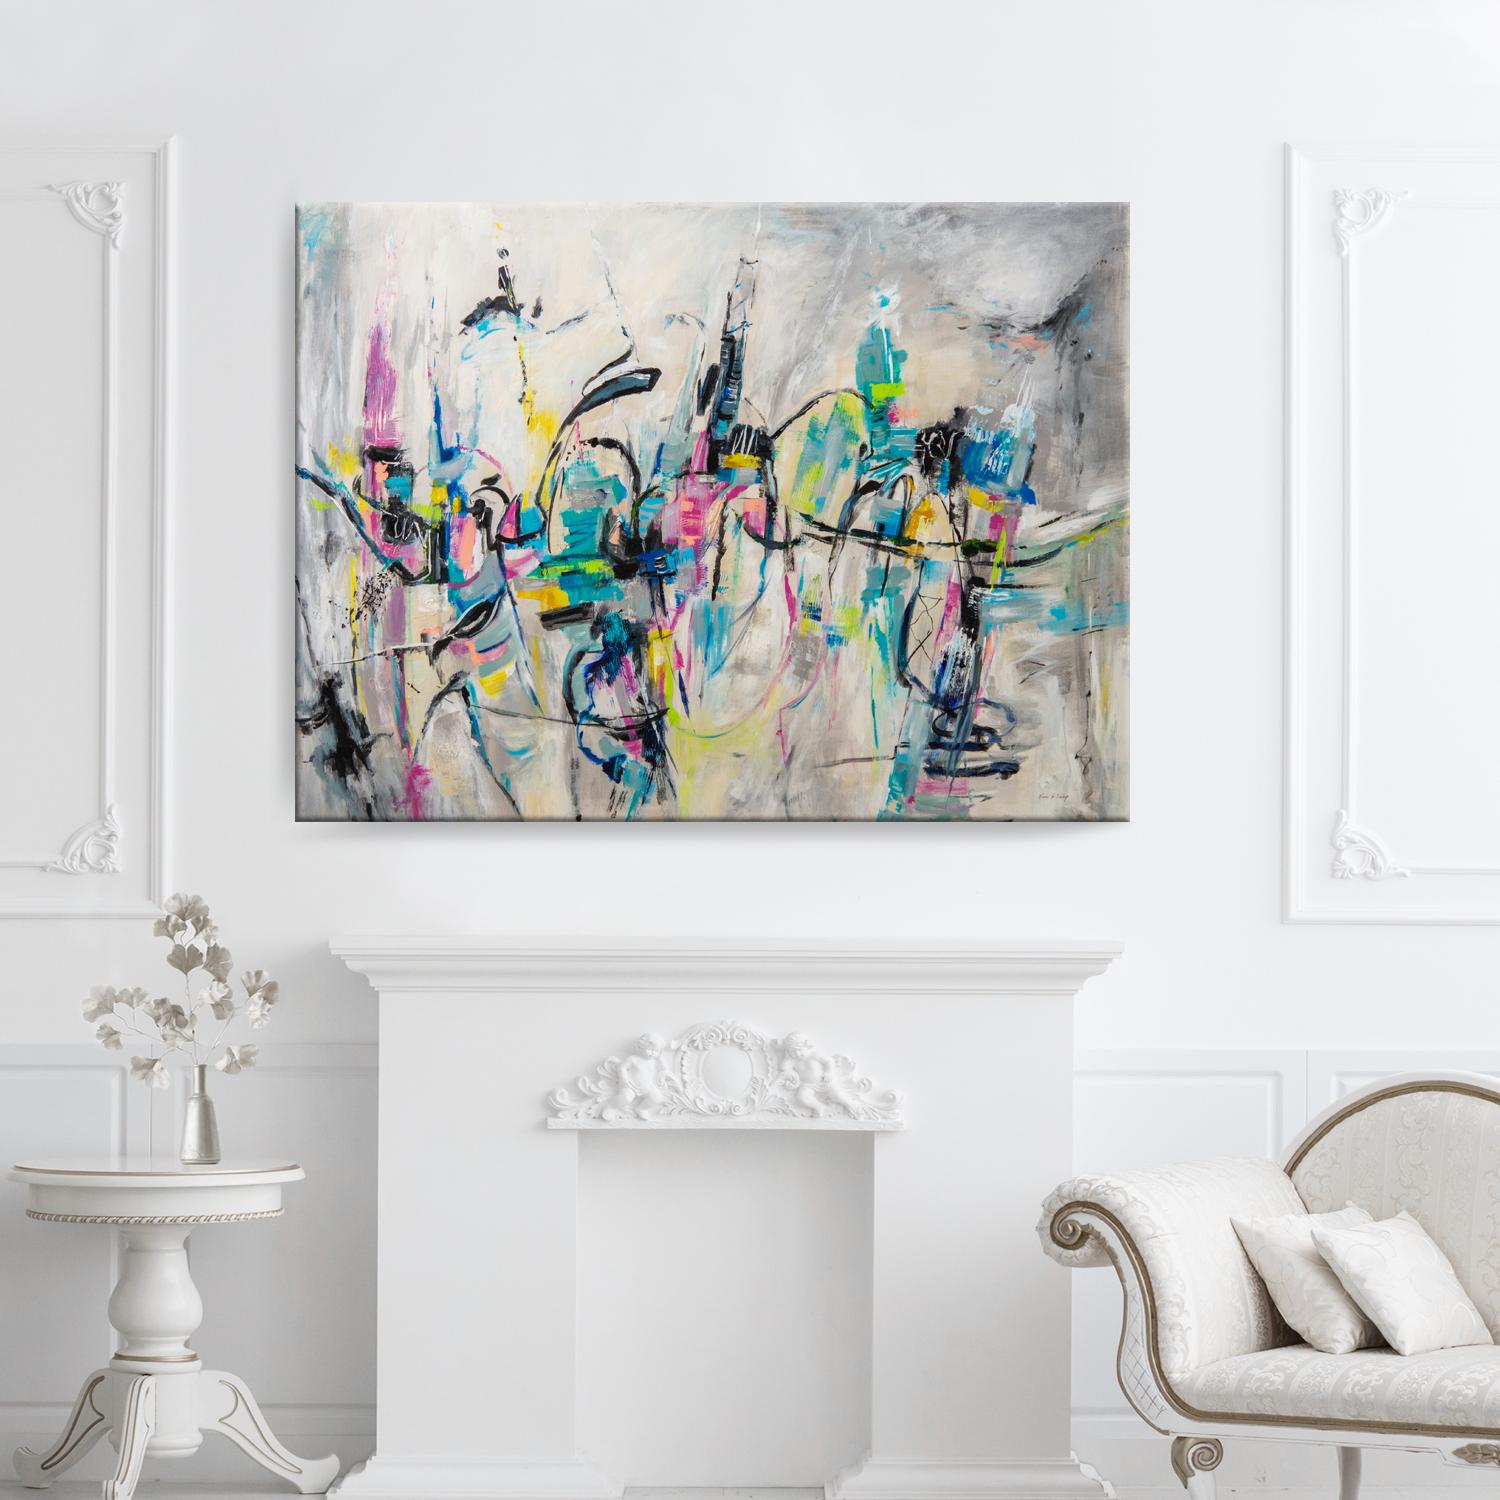 'Cityscape' Wrapped Canvas Original Abstract Painting by Karen H. Salup  1